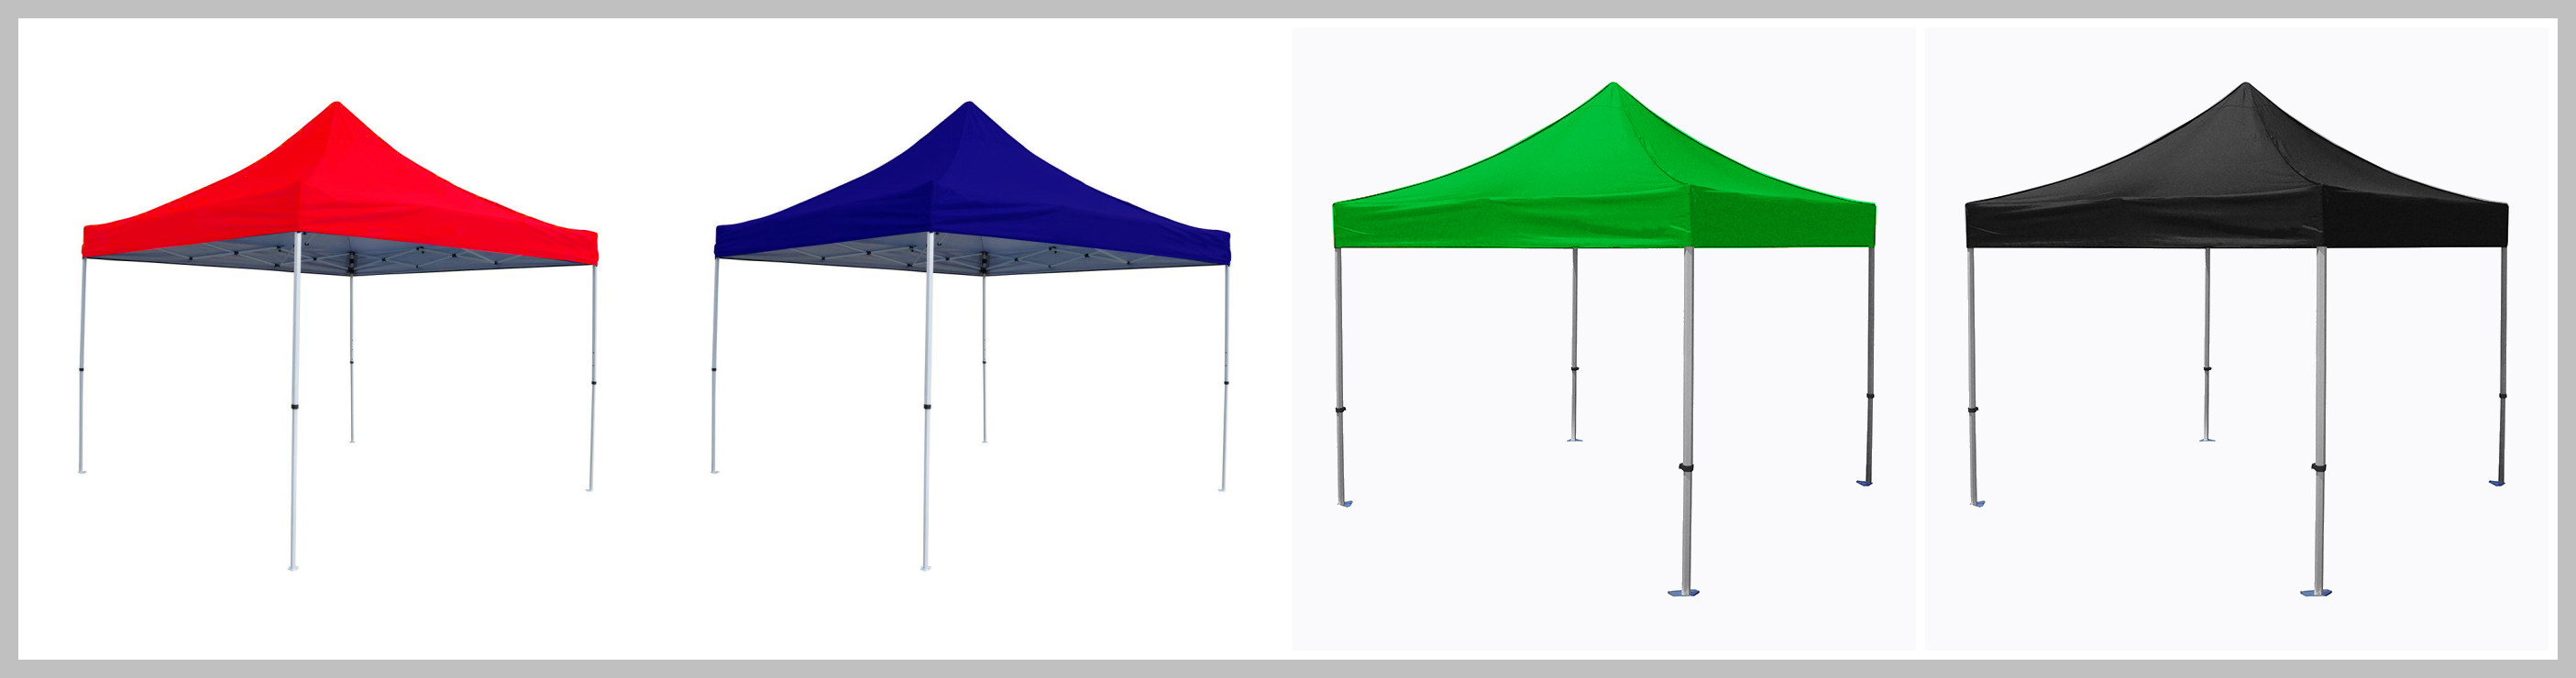 3x3 canopy tent